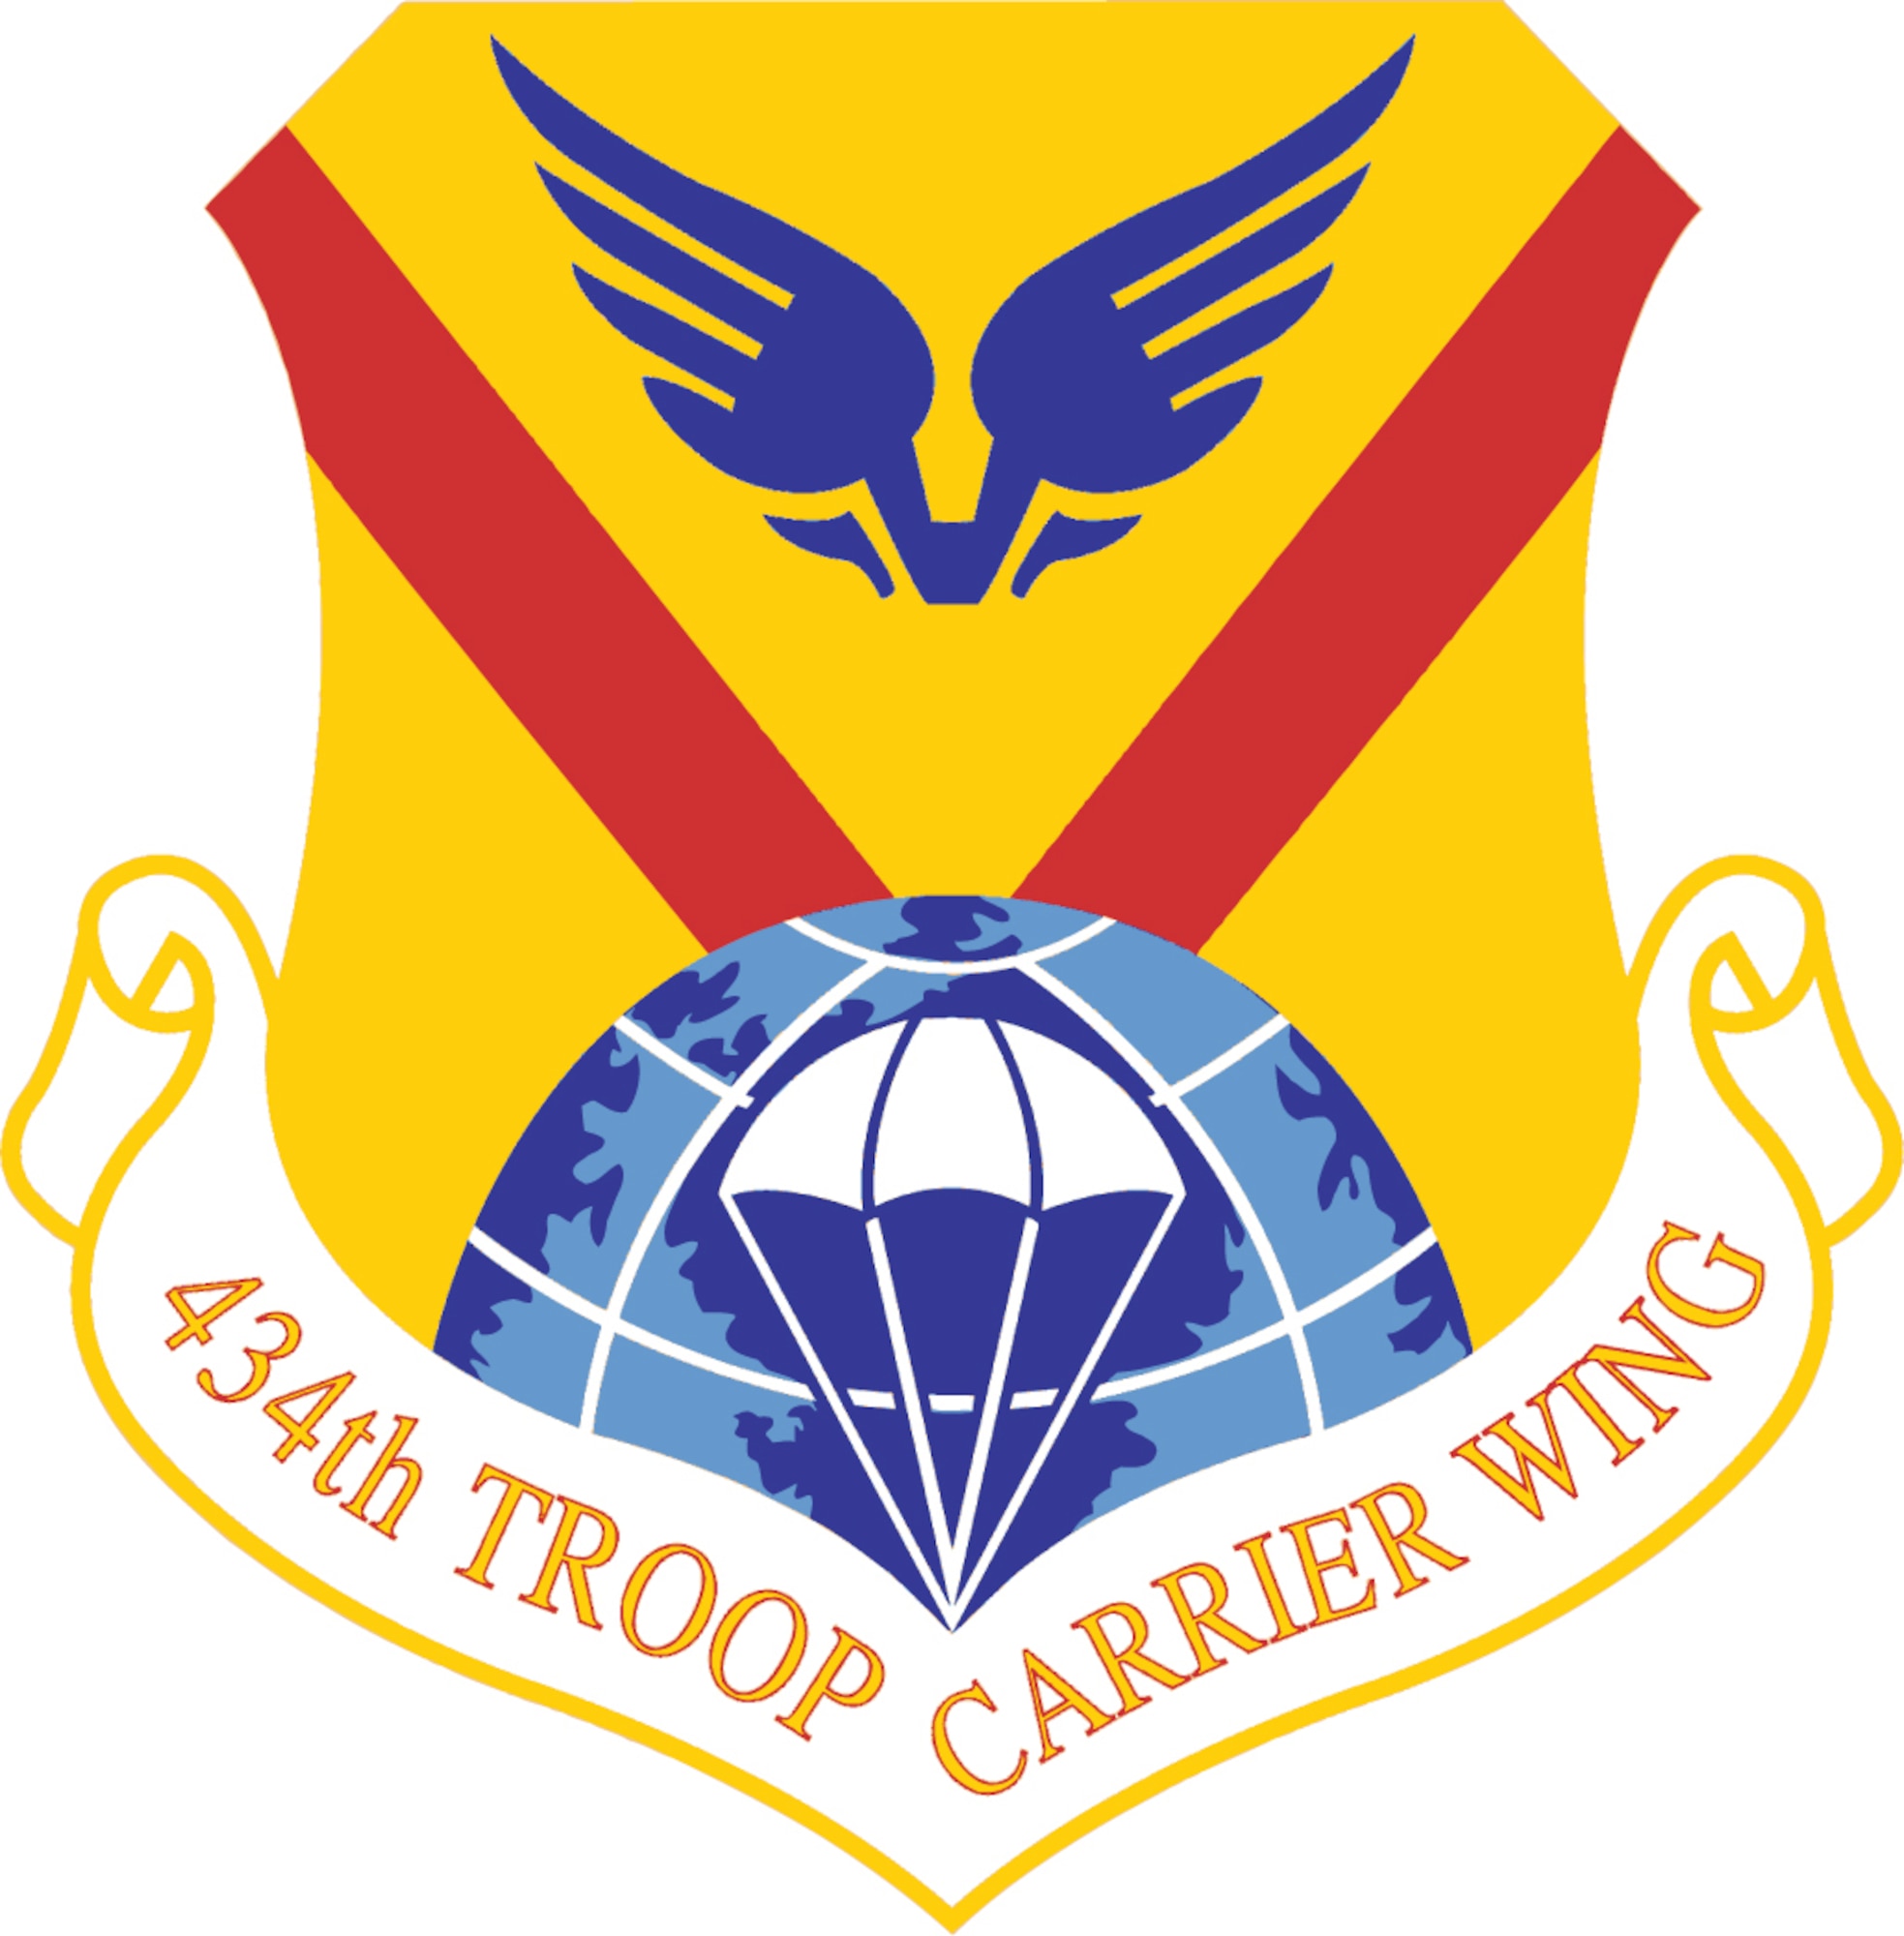 The 434th Air Refueling Wing has a 70-year history dating to World War II. The 434th was officially activated on Oct. 1, 1942 as the 434th Base Headquarters and Air Base Squadron, and later became the 434th Troop Carrier Wing in 1949. (U.S. Air Force graphic)
